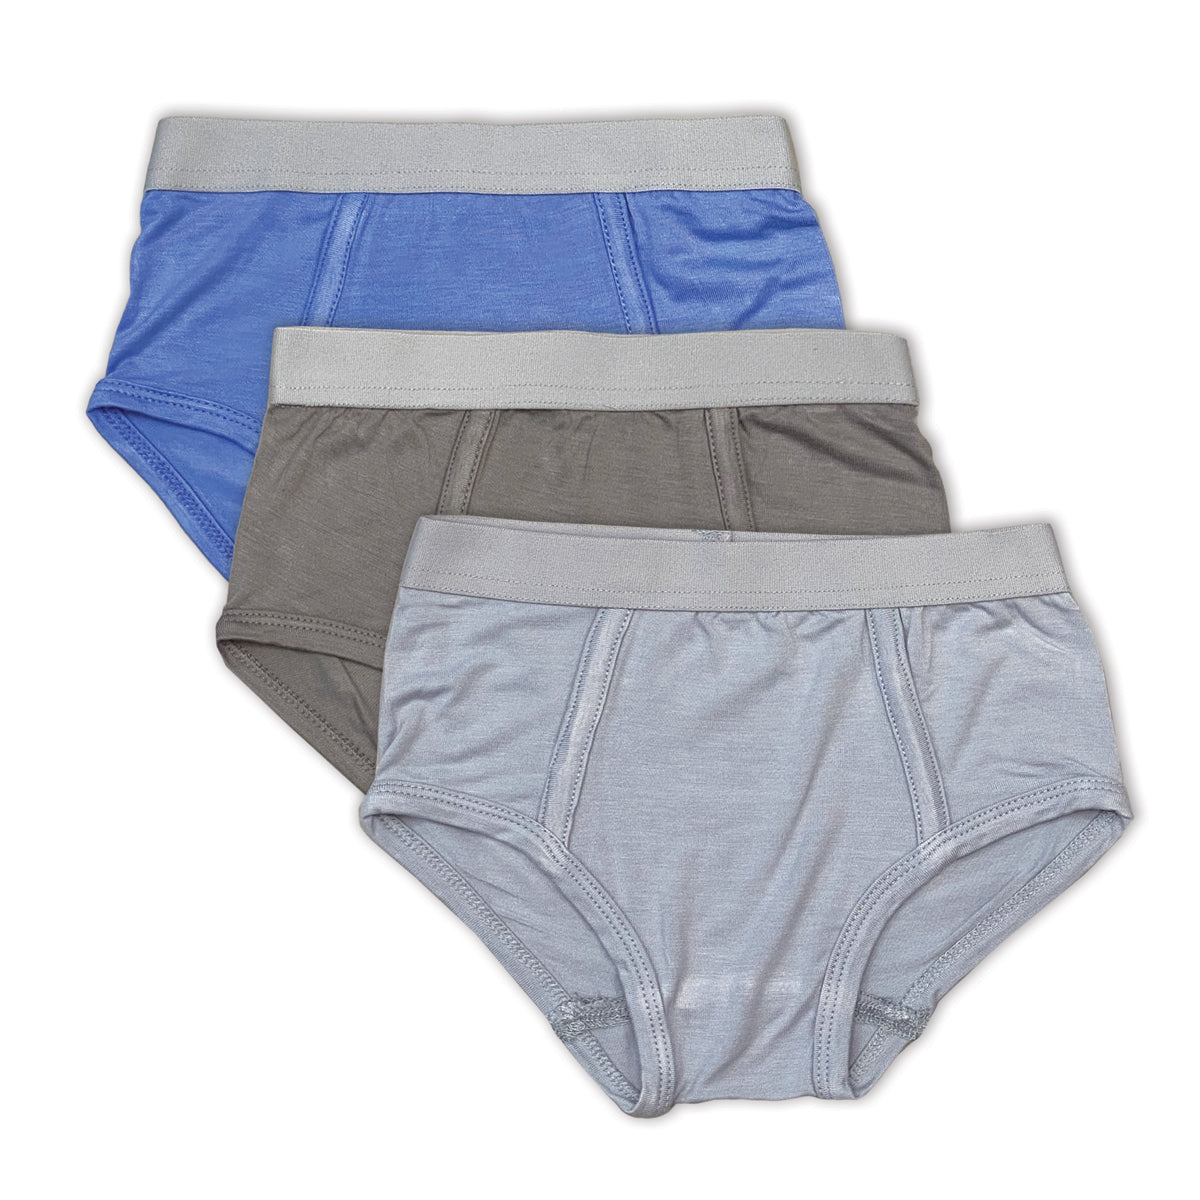 Bamboo Underwear Shorts 2 pack (Seals & Whale Print) 